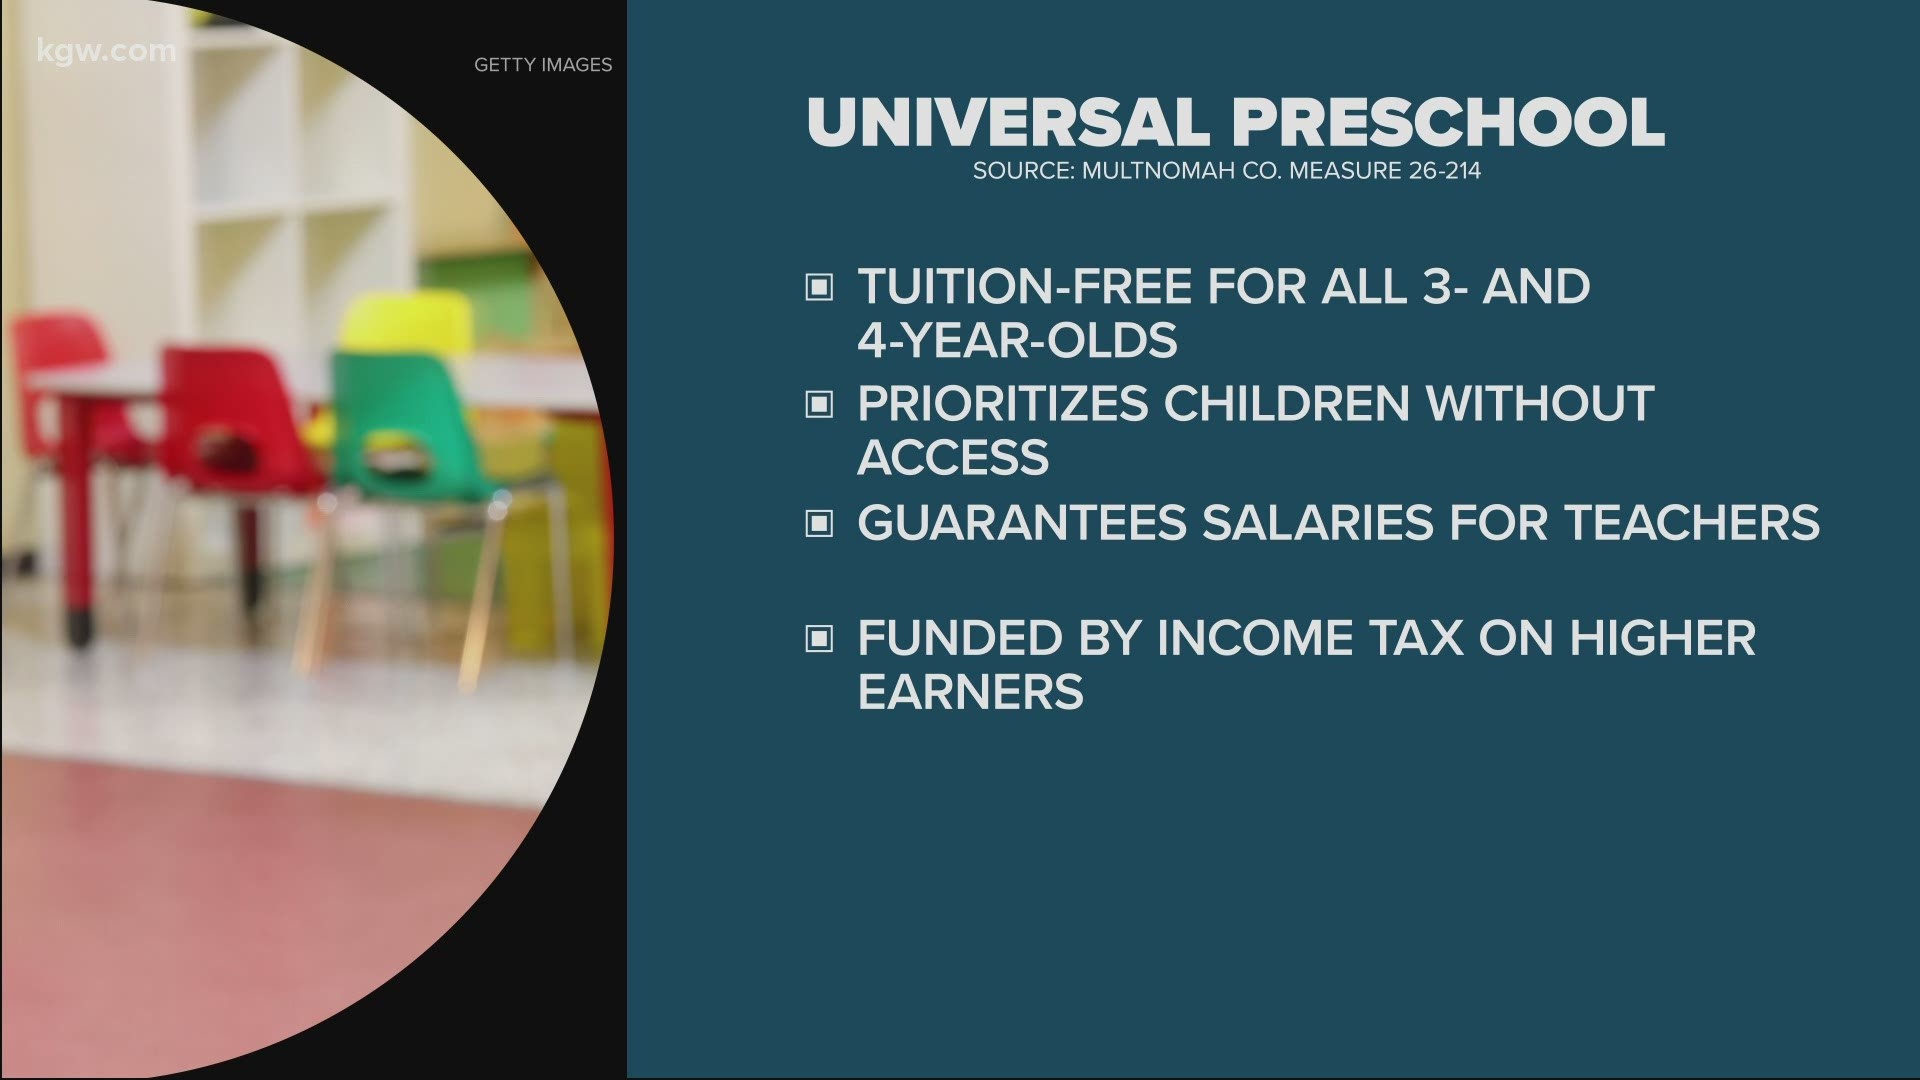 Measure 26-214 would make preschool tuition-free -- for all three and four-year-old’s in the county.